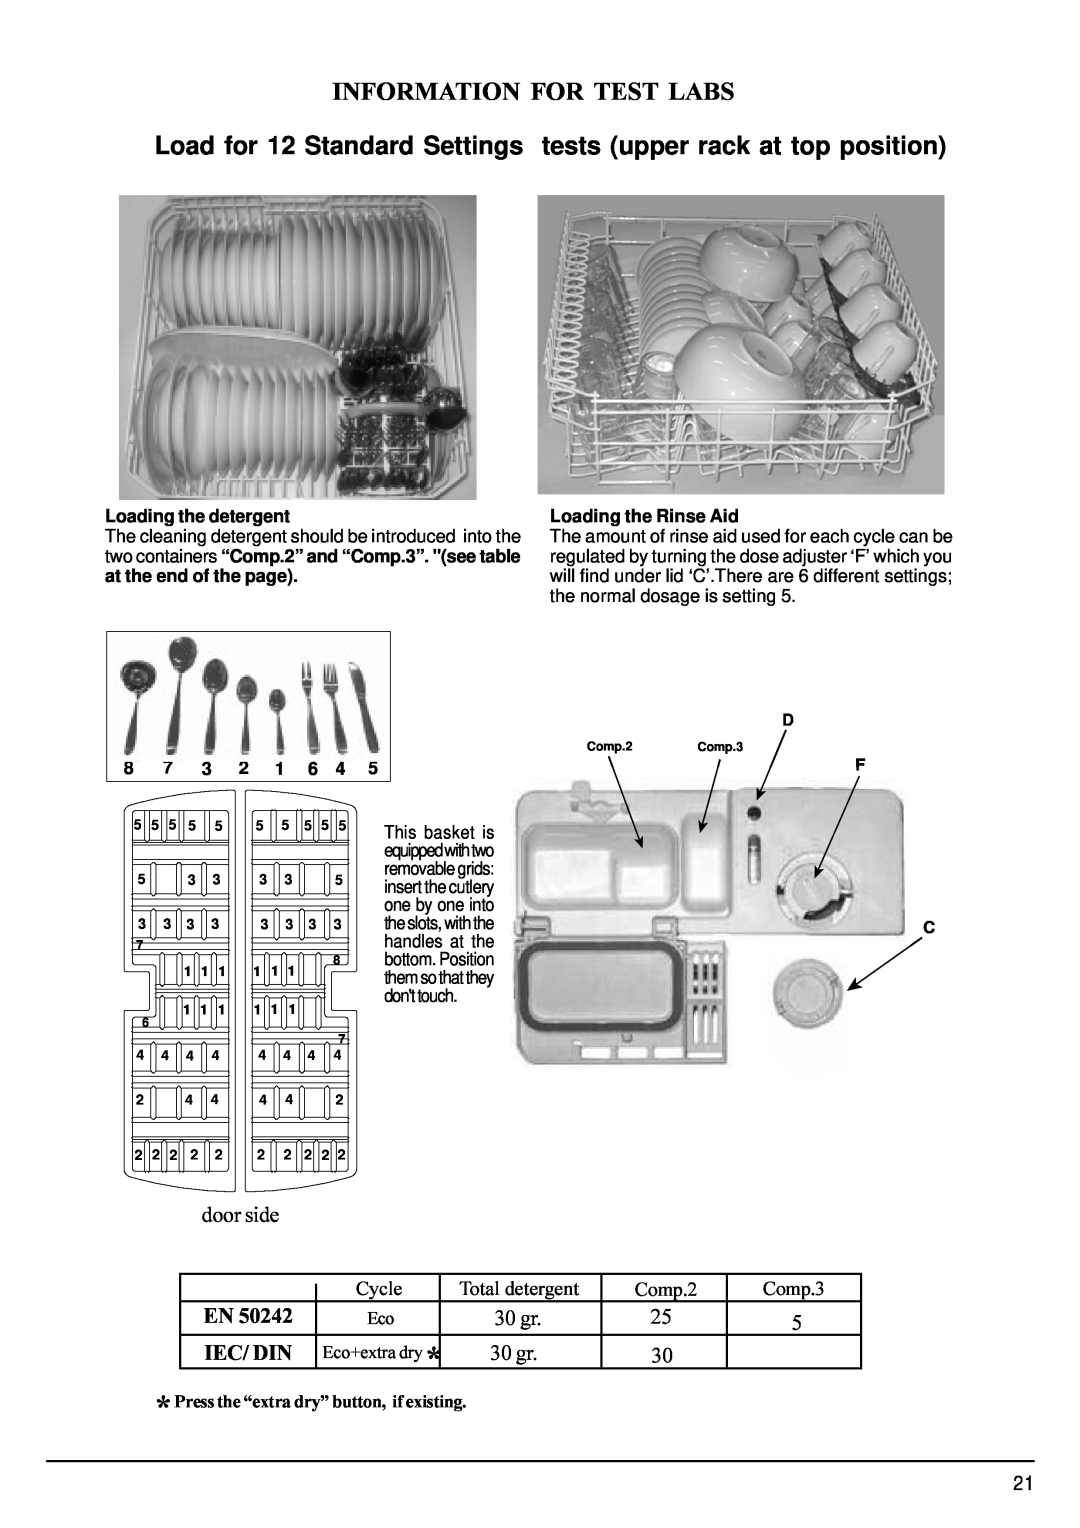 Hotpoint ULTIMA manual Information For Test Labs, Load for 12 Standard Settings tests upper rack at top position, door side 